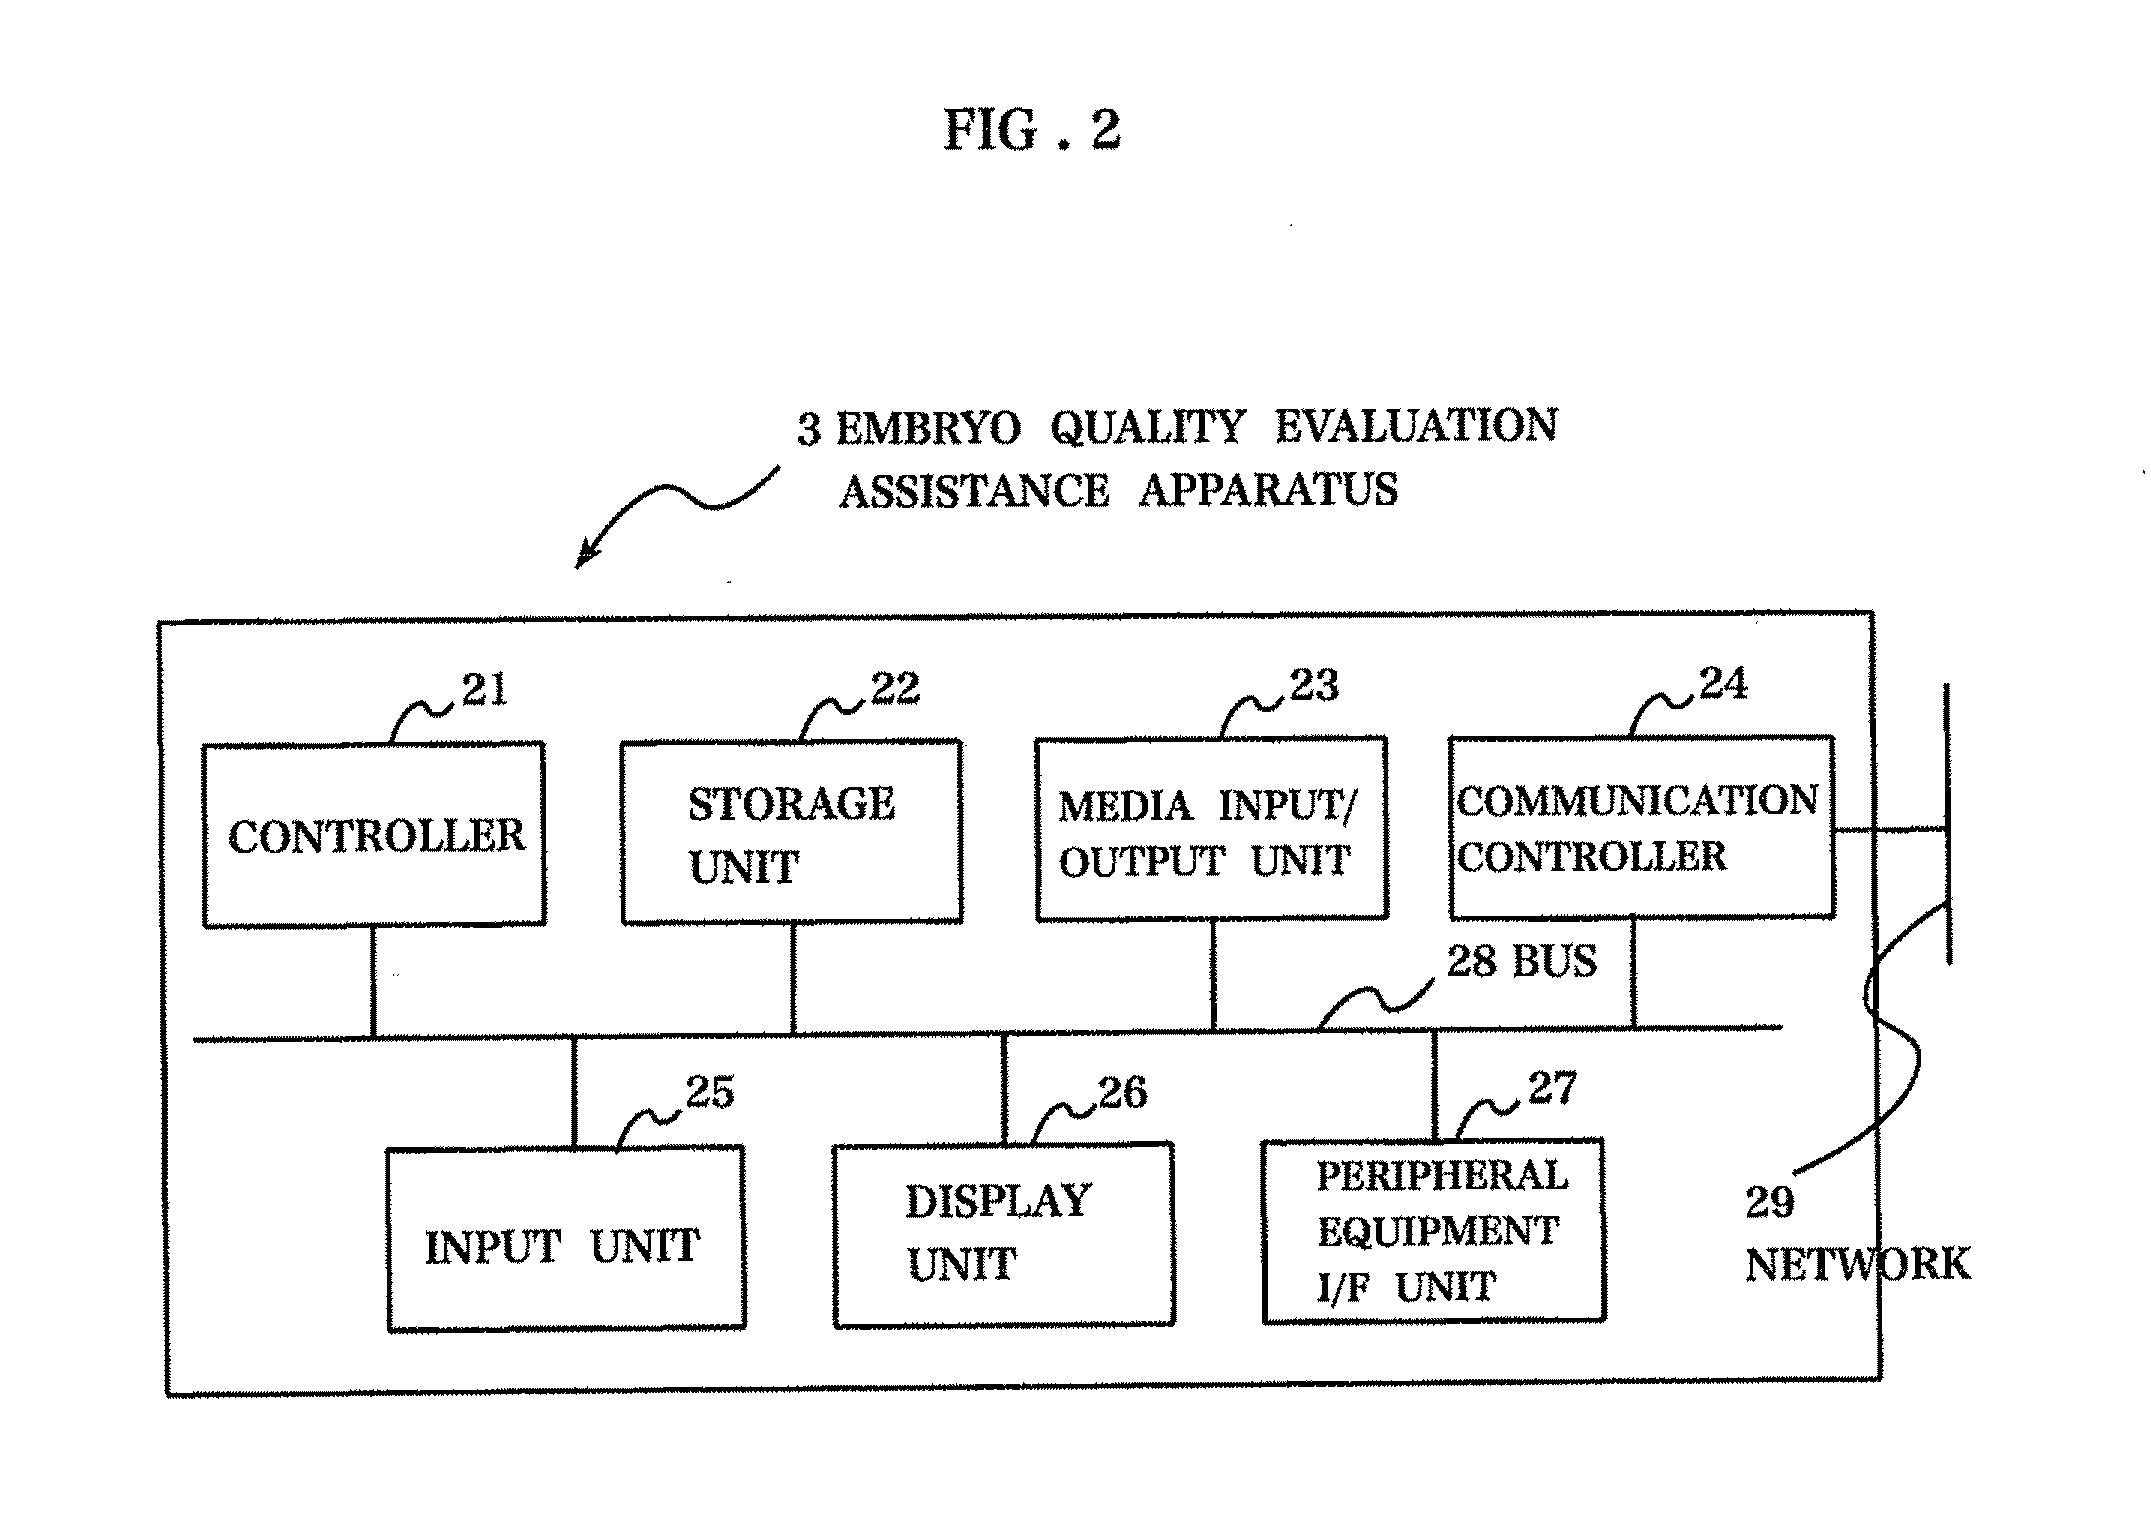 Embryo quality evaluation assistance system, embryo quality evaluation assistance apparatus and embryo quality evaluation assistance method